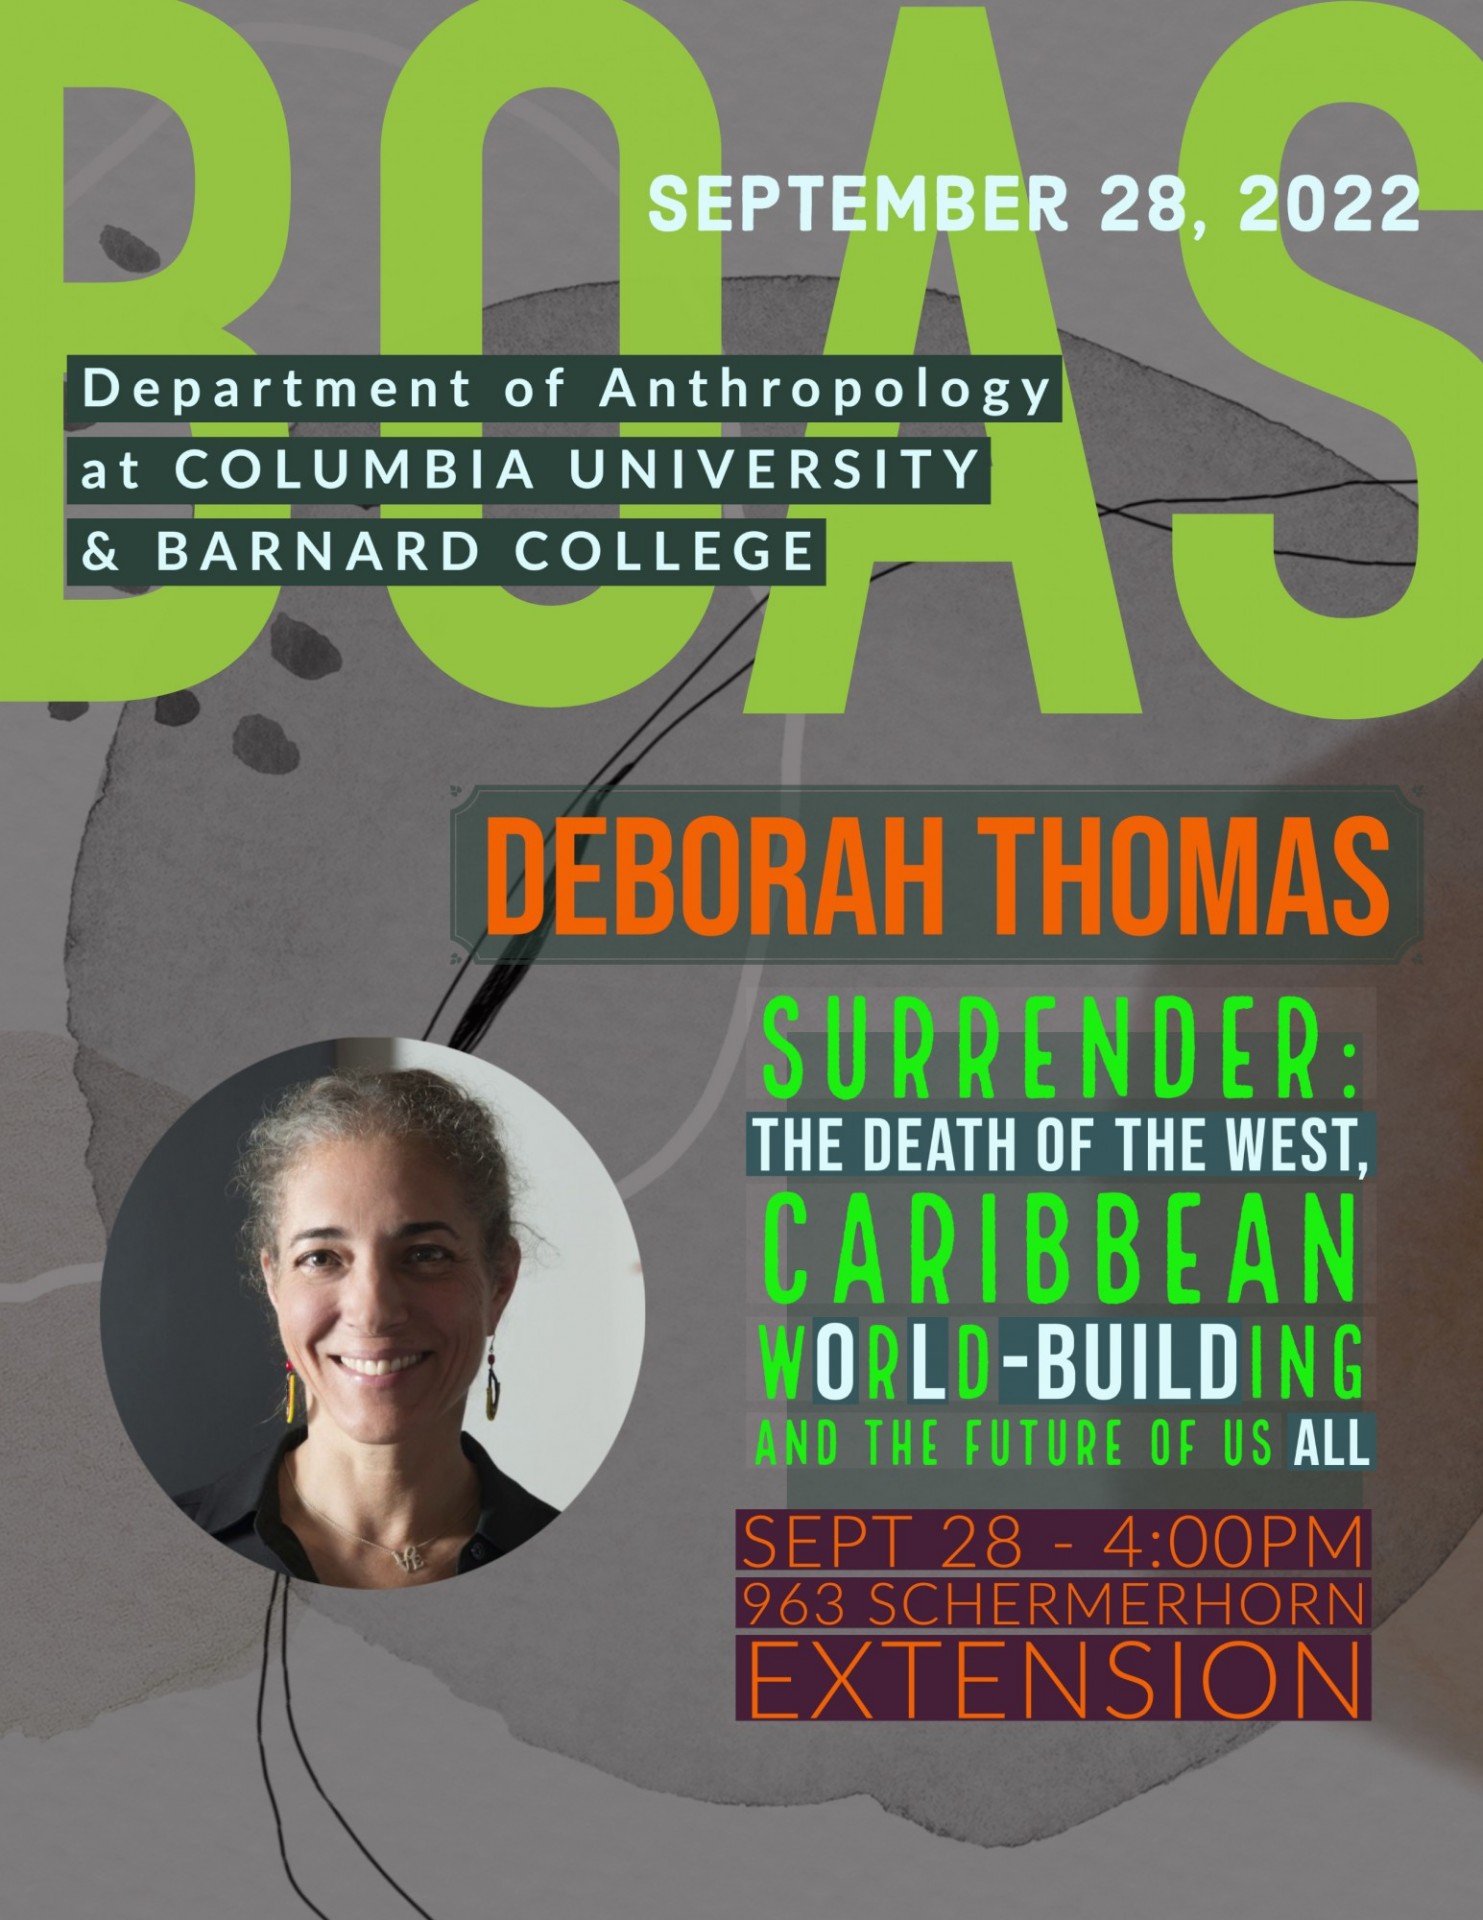 Poster announcing Boas Seminar with Deborah Thomas, Surrender: The Death of the West, Caribbean World-Building and the Future of Us All."